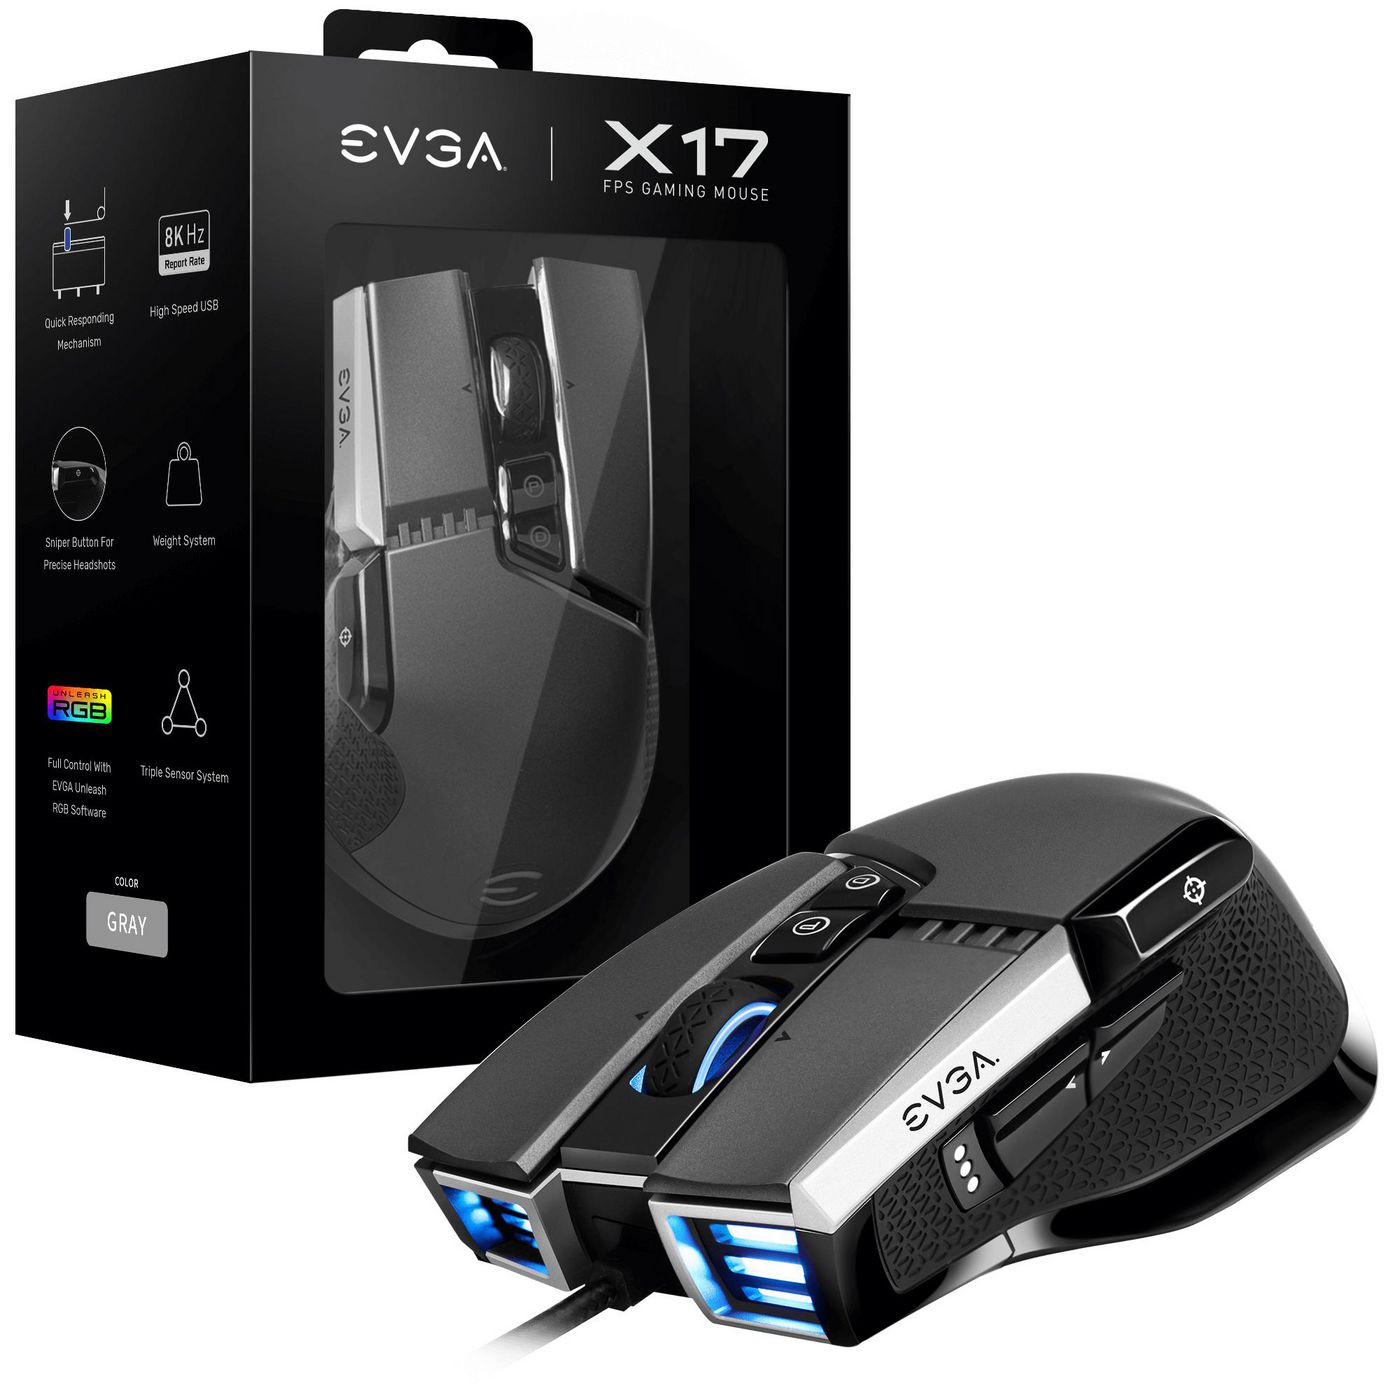 EVGA 903-W1-17GR-K3 W128254808 X17 Mouse Right-Hand Usb 